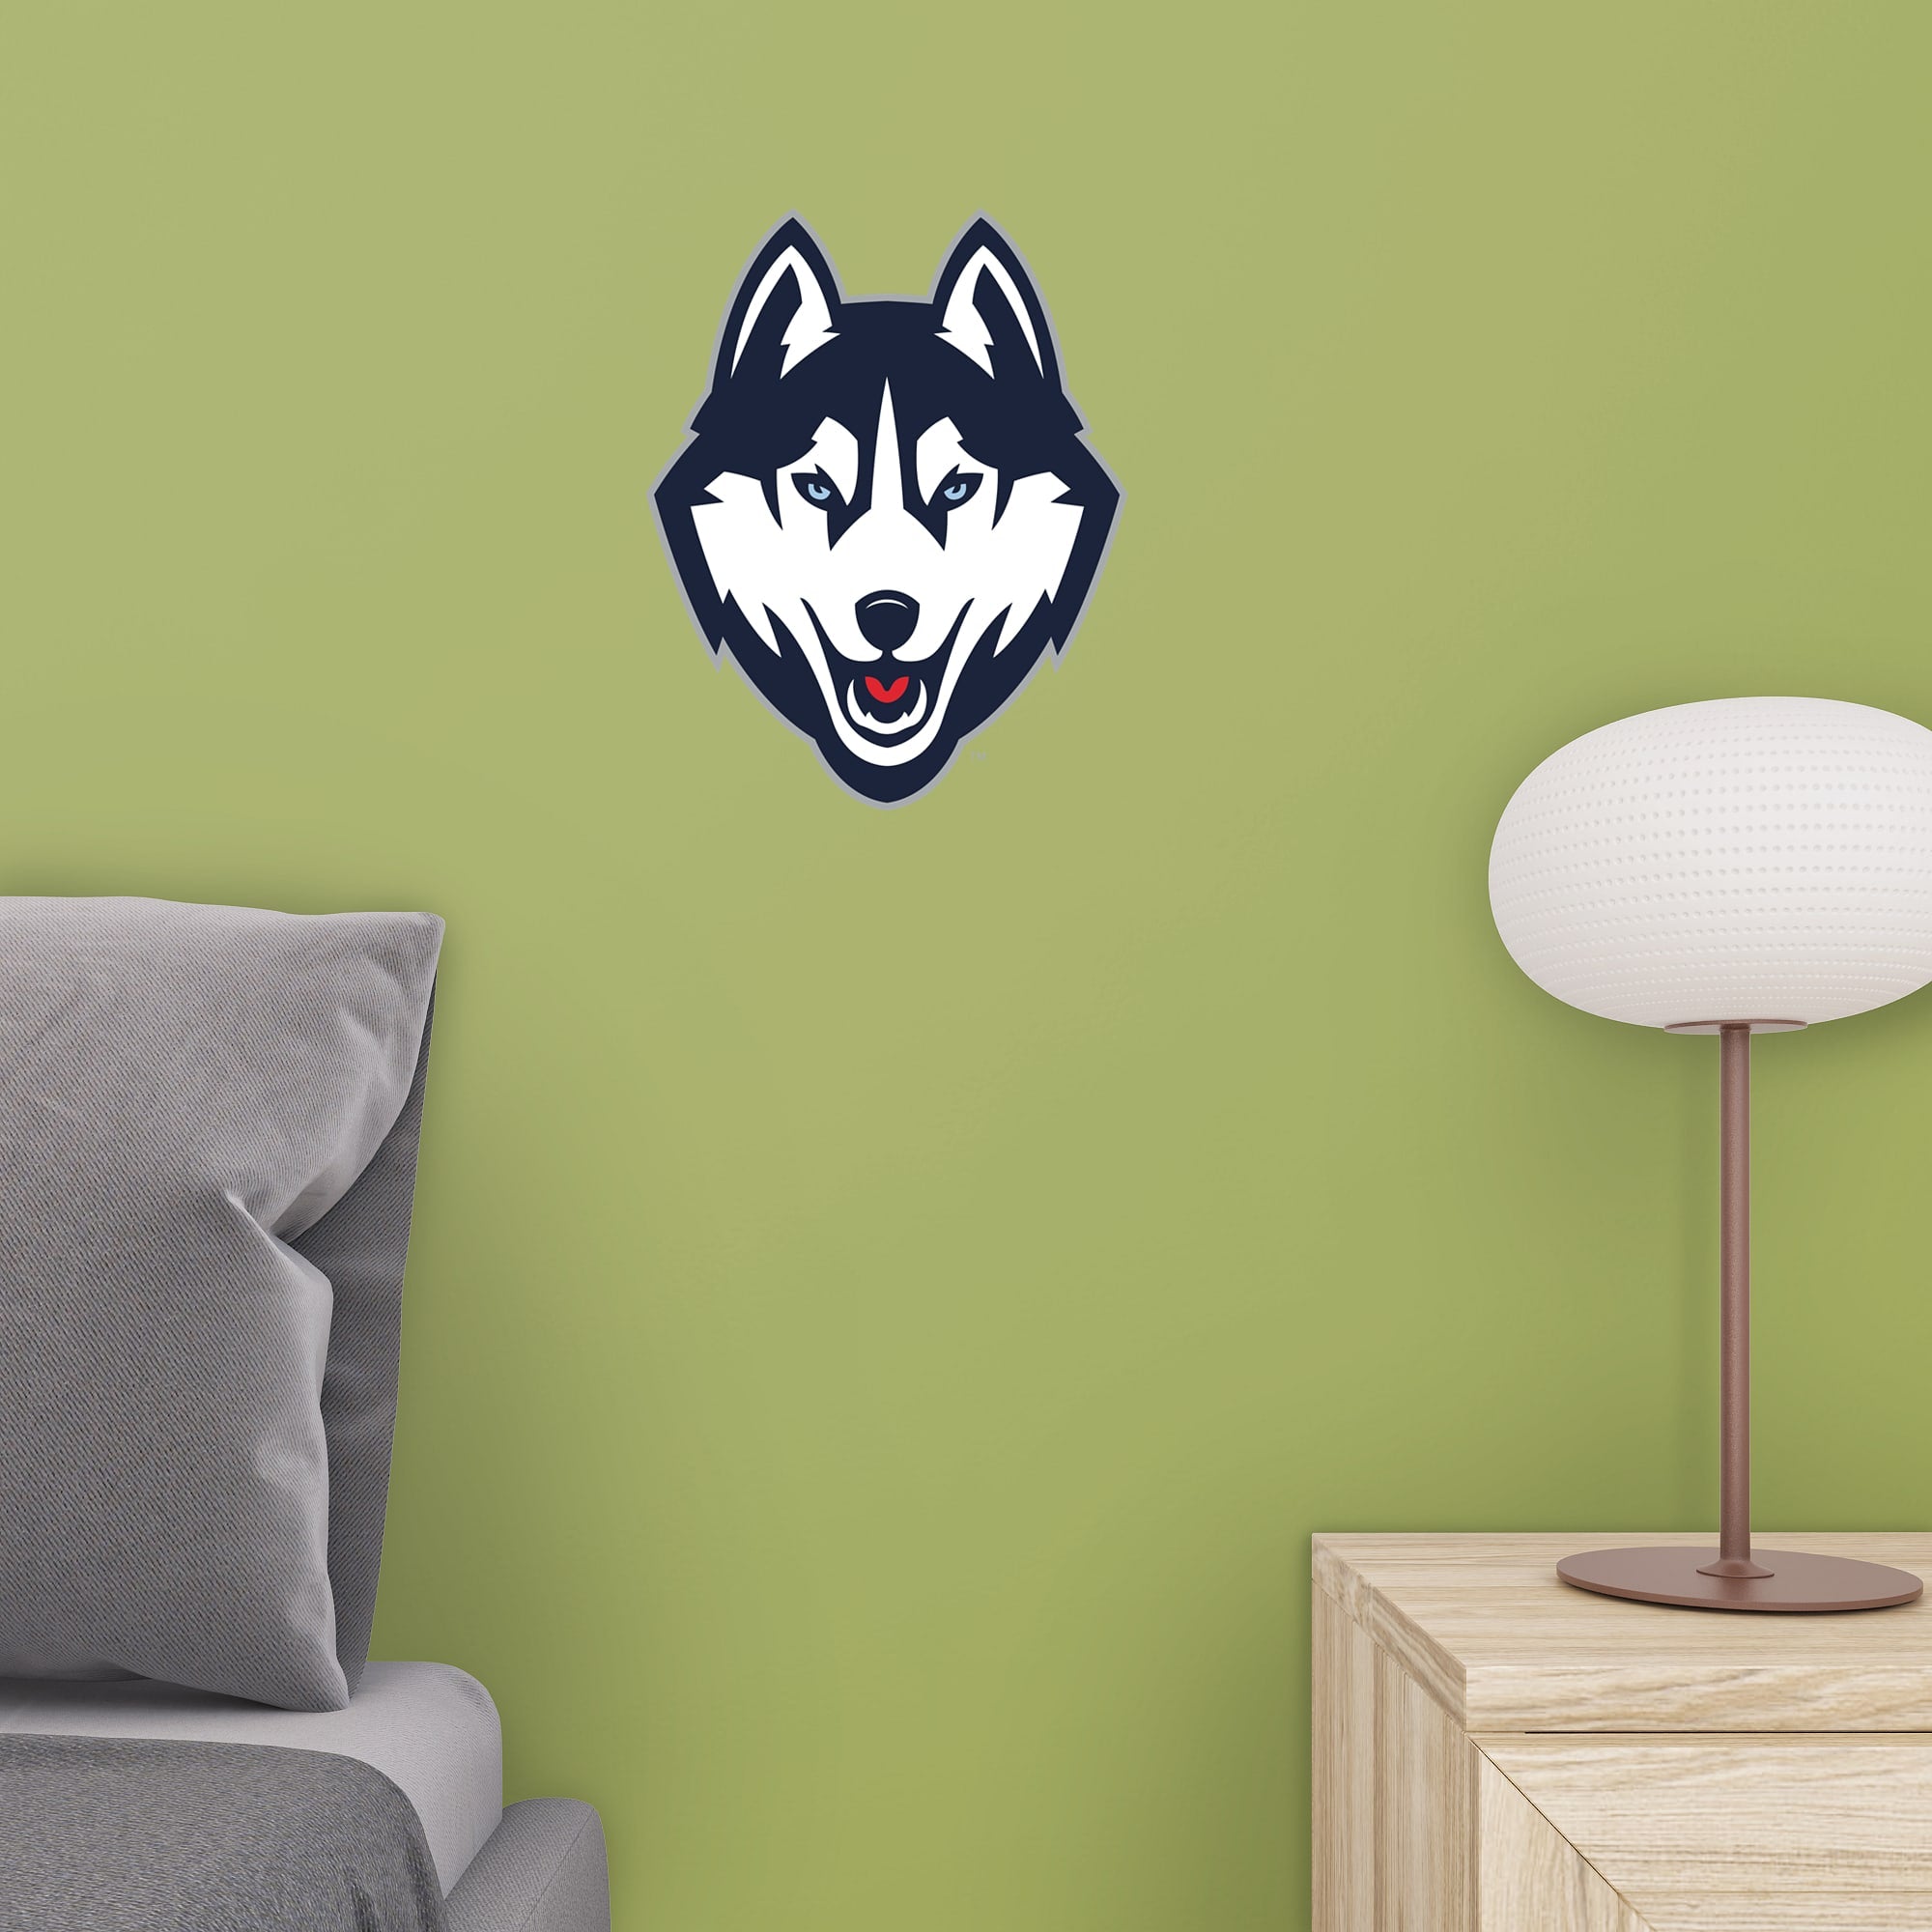 UConn Huskies: Logo - Officially Licensed Removable Wall Decal 11.0"W x 13.0"H by Fathead | Vinyl